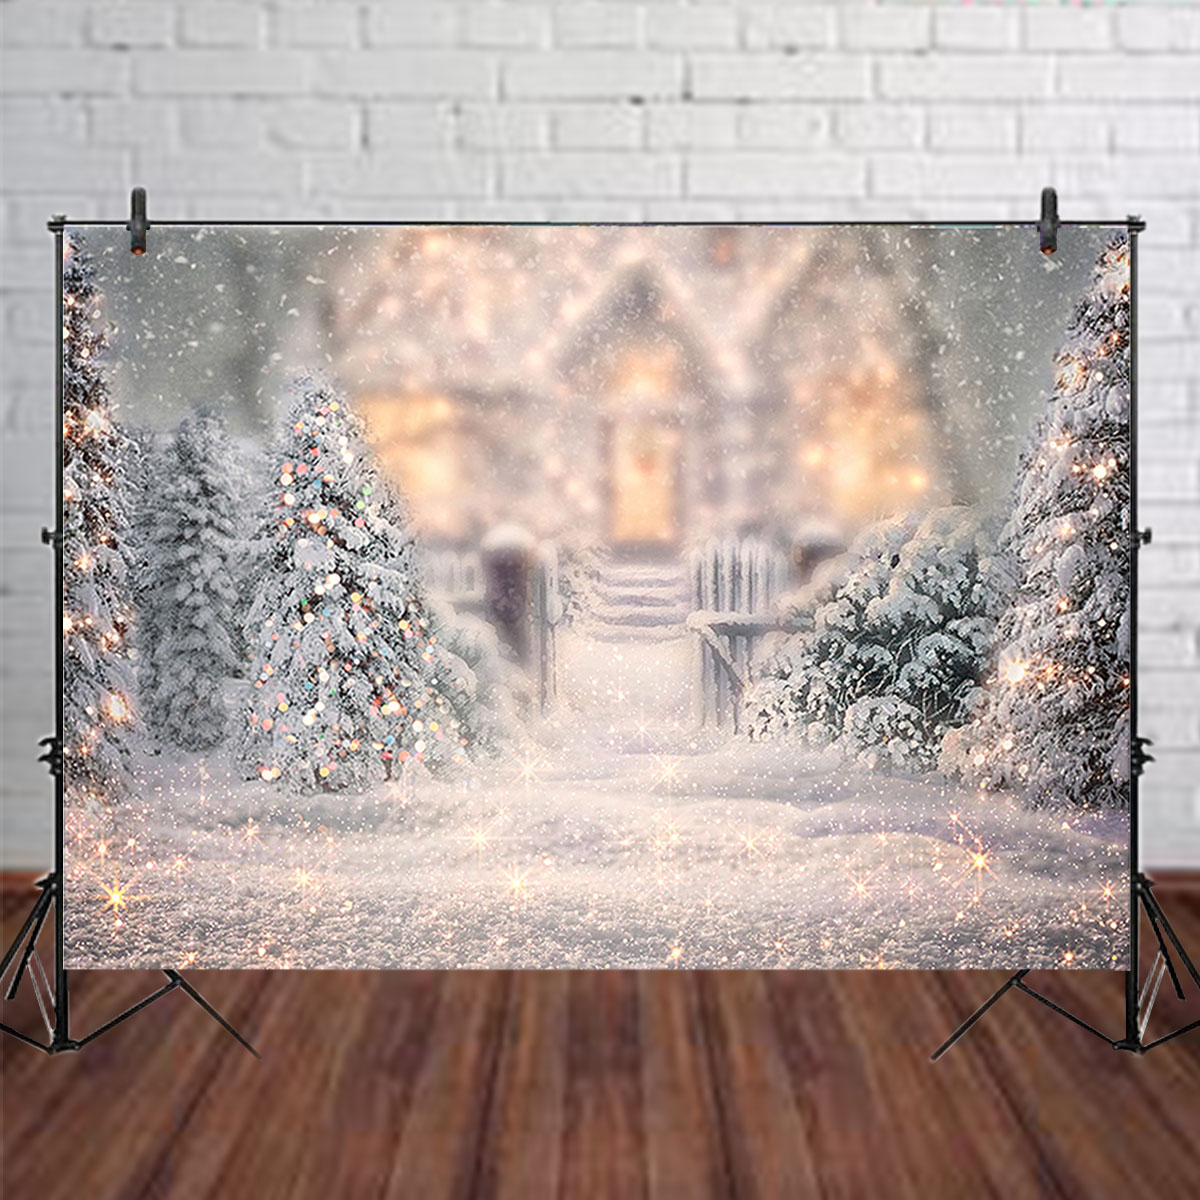 5x3FT-7x5FT-8x6FT-Christmas-Tree-Snow-Photography-Backdrop-Background-Studio-Prop-1609479-2